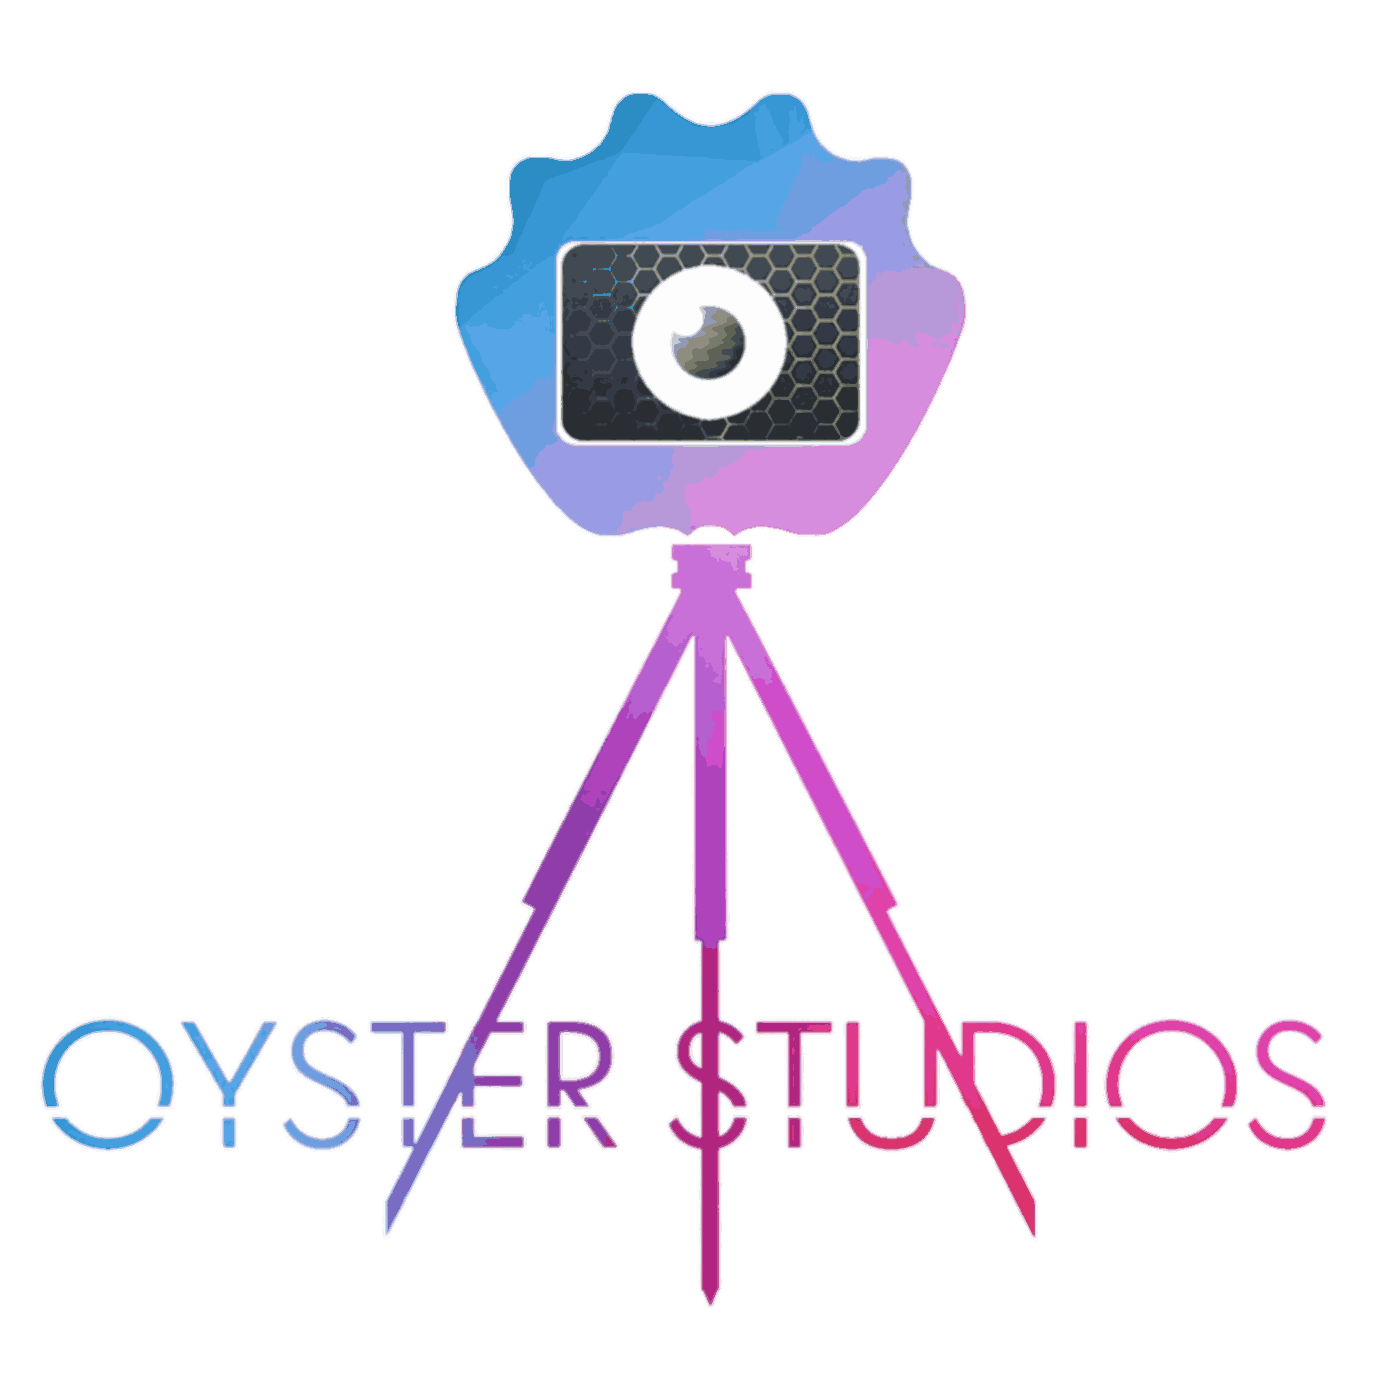 the oyster studios